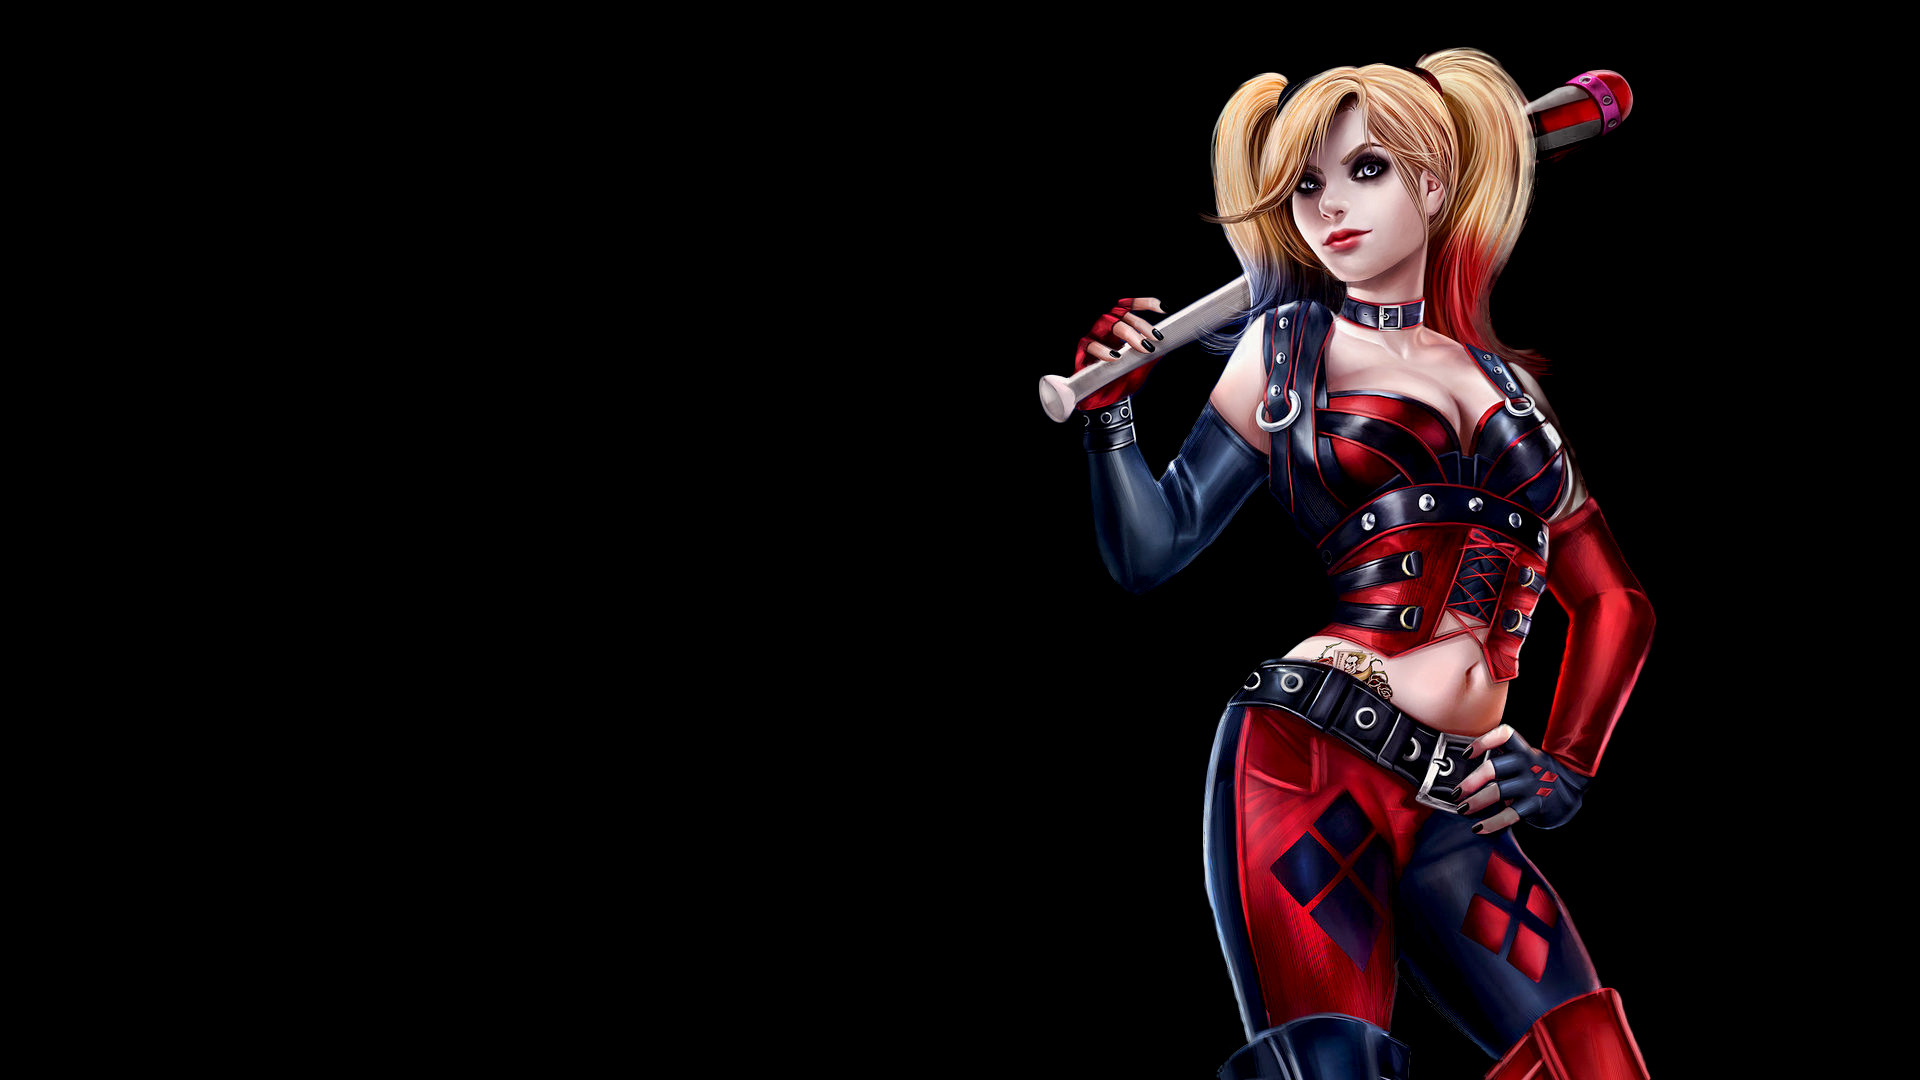 Harley Quinn Hd Wallpaper Background Image 1920x1080 Id 609143 Wallpaper Abyss